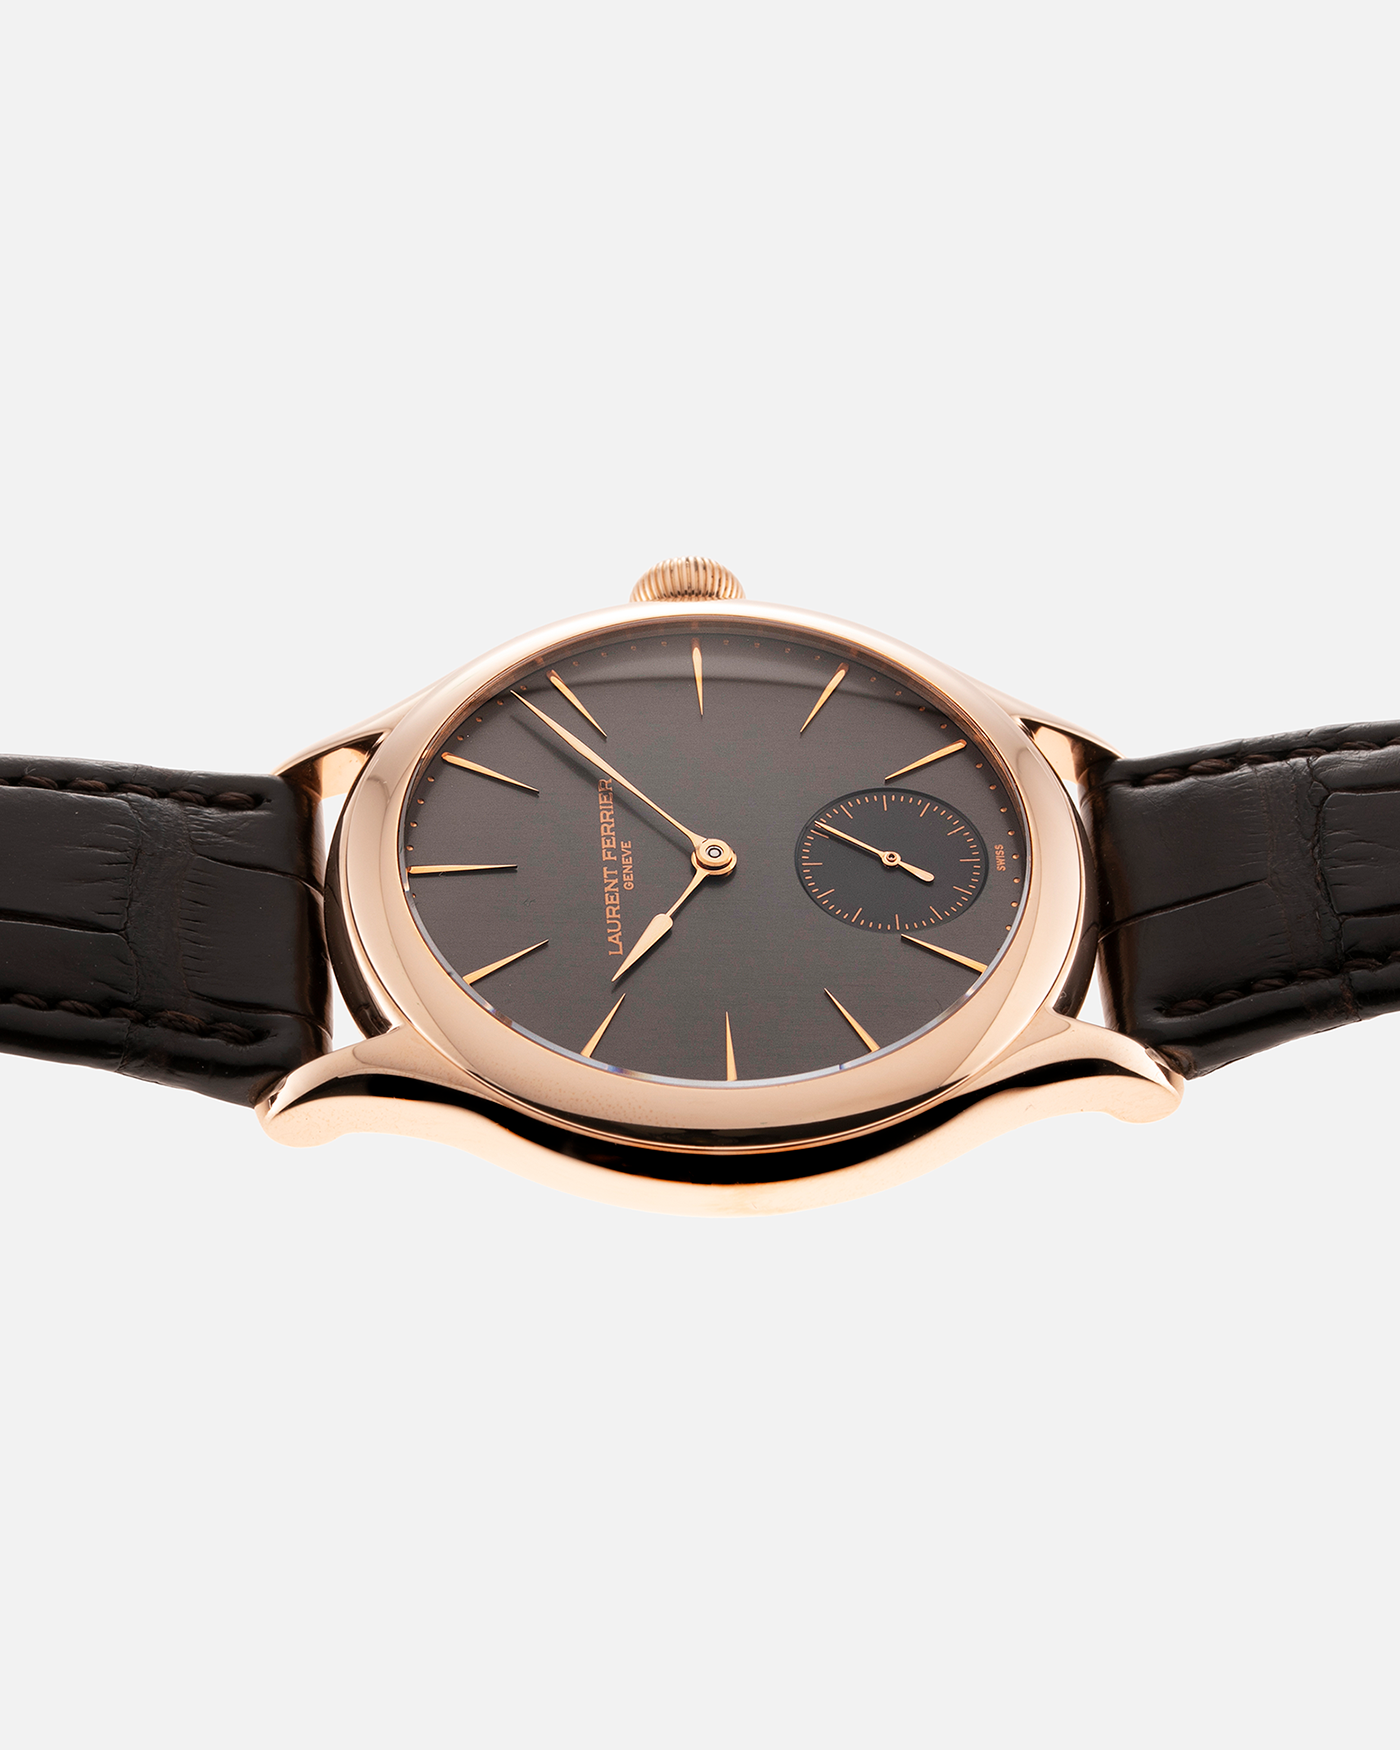 Brand: Laurent Ferrier Year: 2012 Model: Galet Classic Micro-Rotor Material: 18k Rose Gold Movement: Cal. 229.01 Micro-Rotor Case Diameter: 40mm Bracelet/Strap: Laurent Ferrier Brown Alligator Leather Strap with Laurent Ferrier 18k Rose Gold Tang Buckle